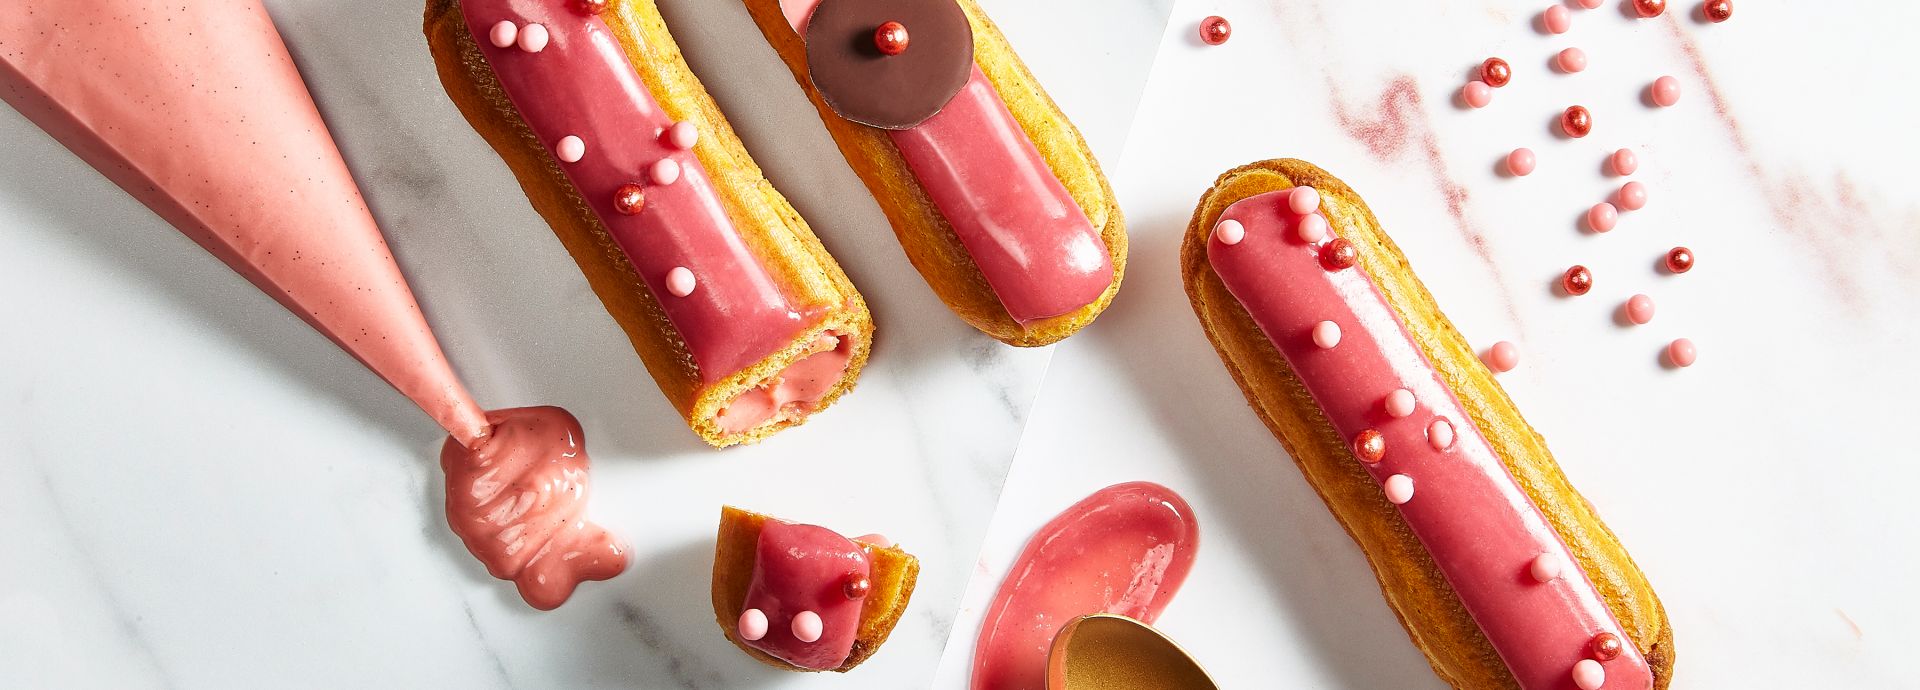 Éclairs con ruby